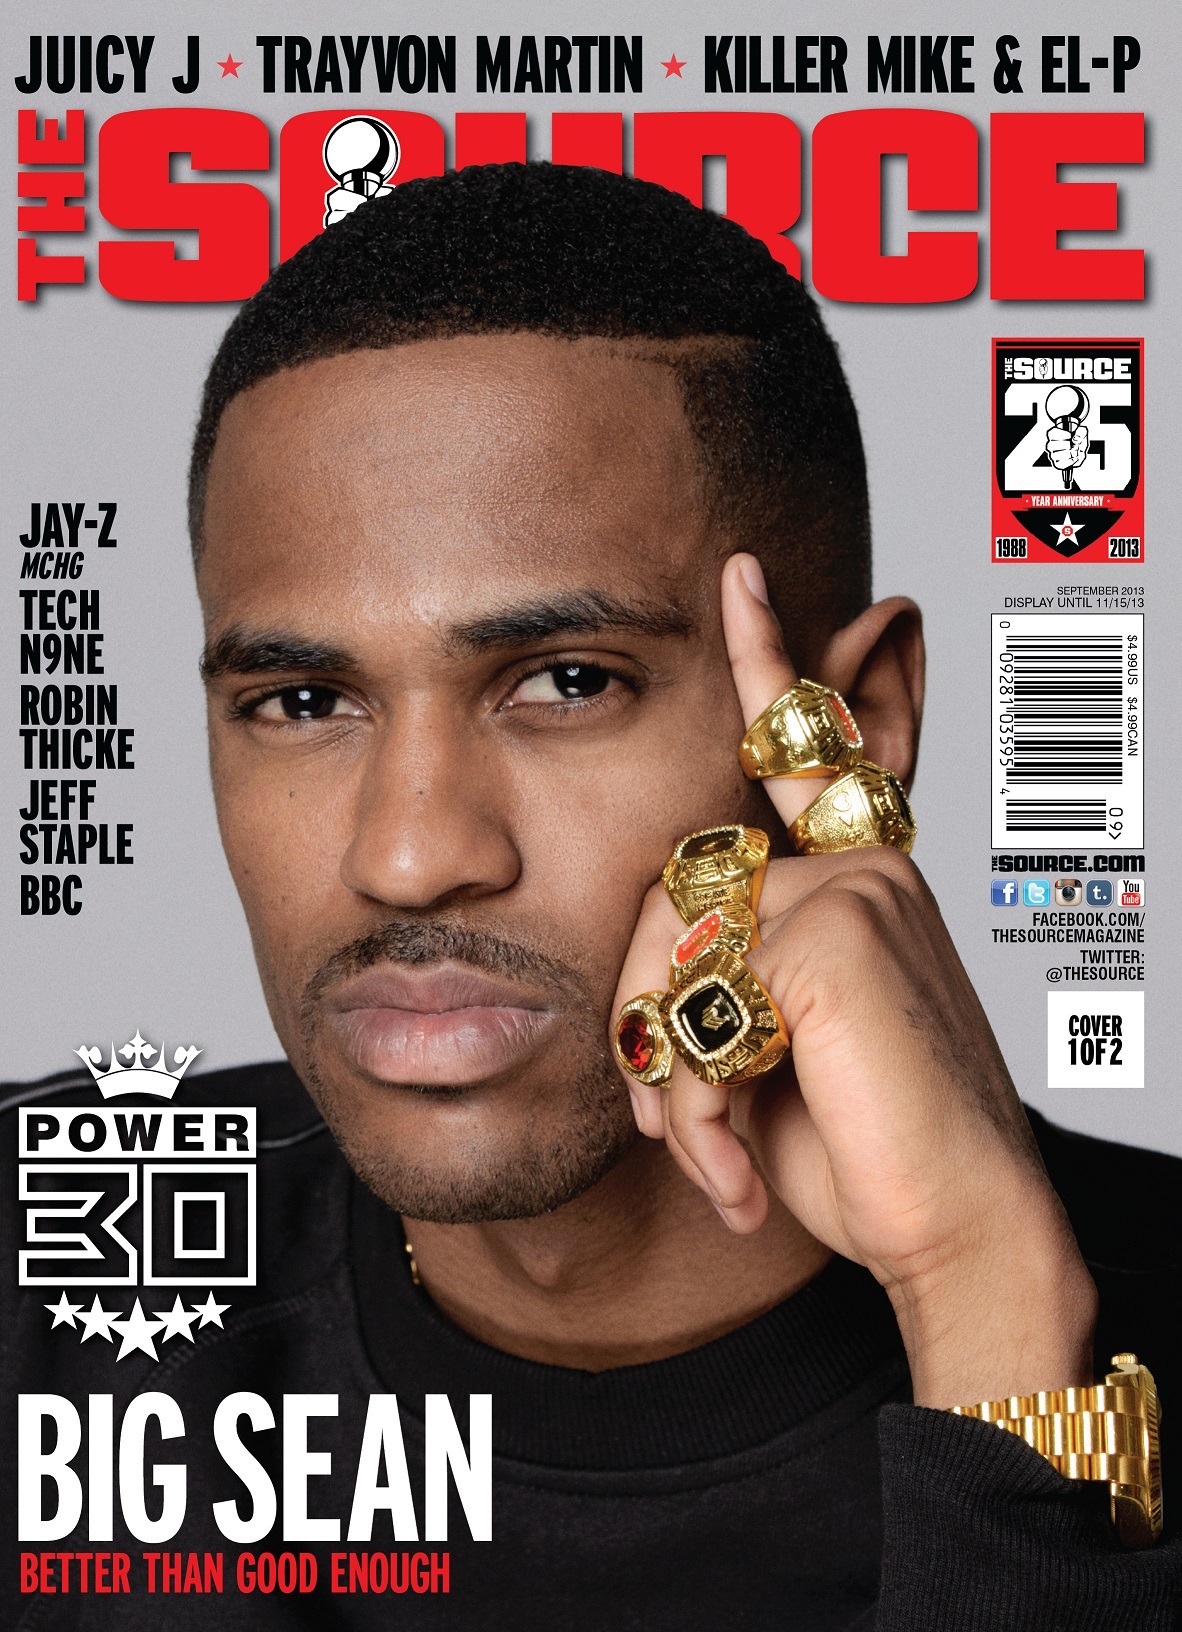 Exclusive: Big Sean On Cover 1-Of-2 Of The August/September Issue Of ...